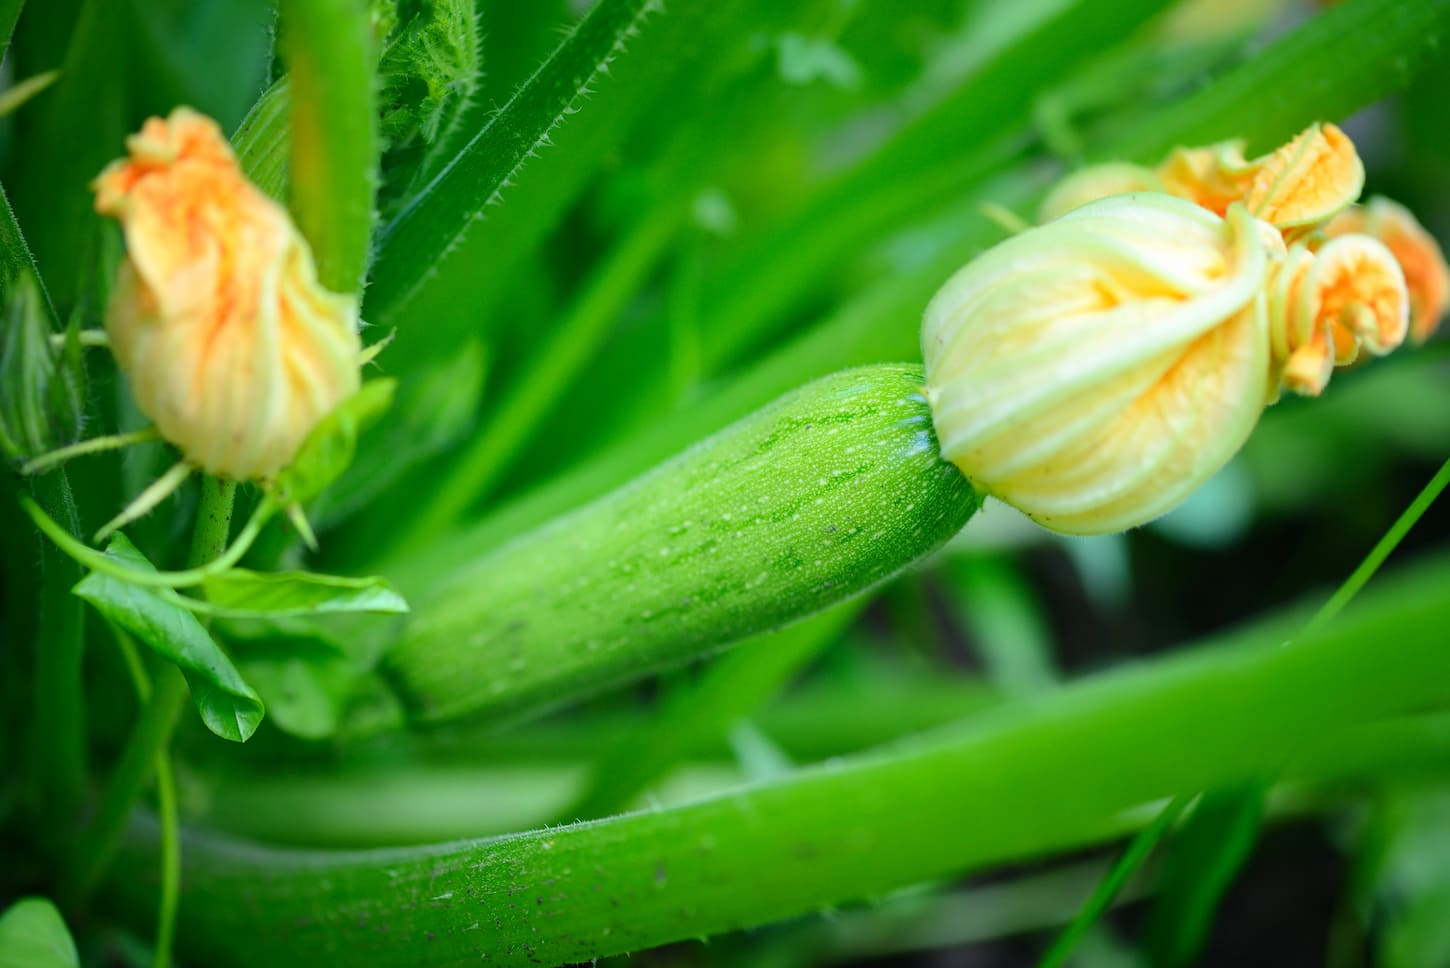 An image of a young zucchini with yellow flowers in the garden.